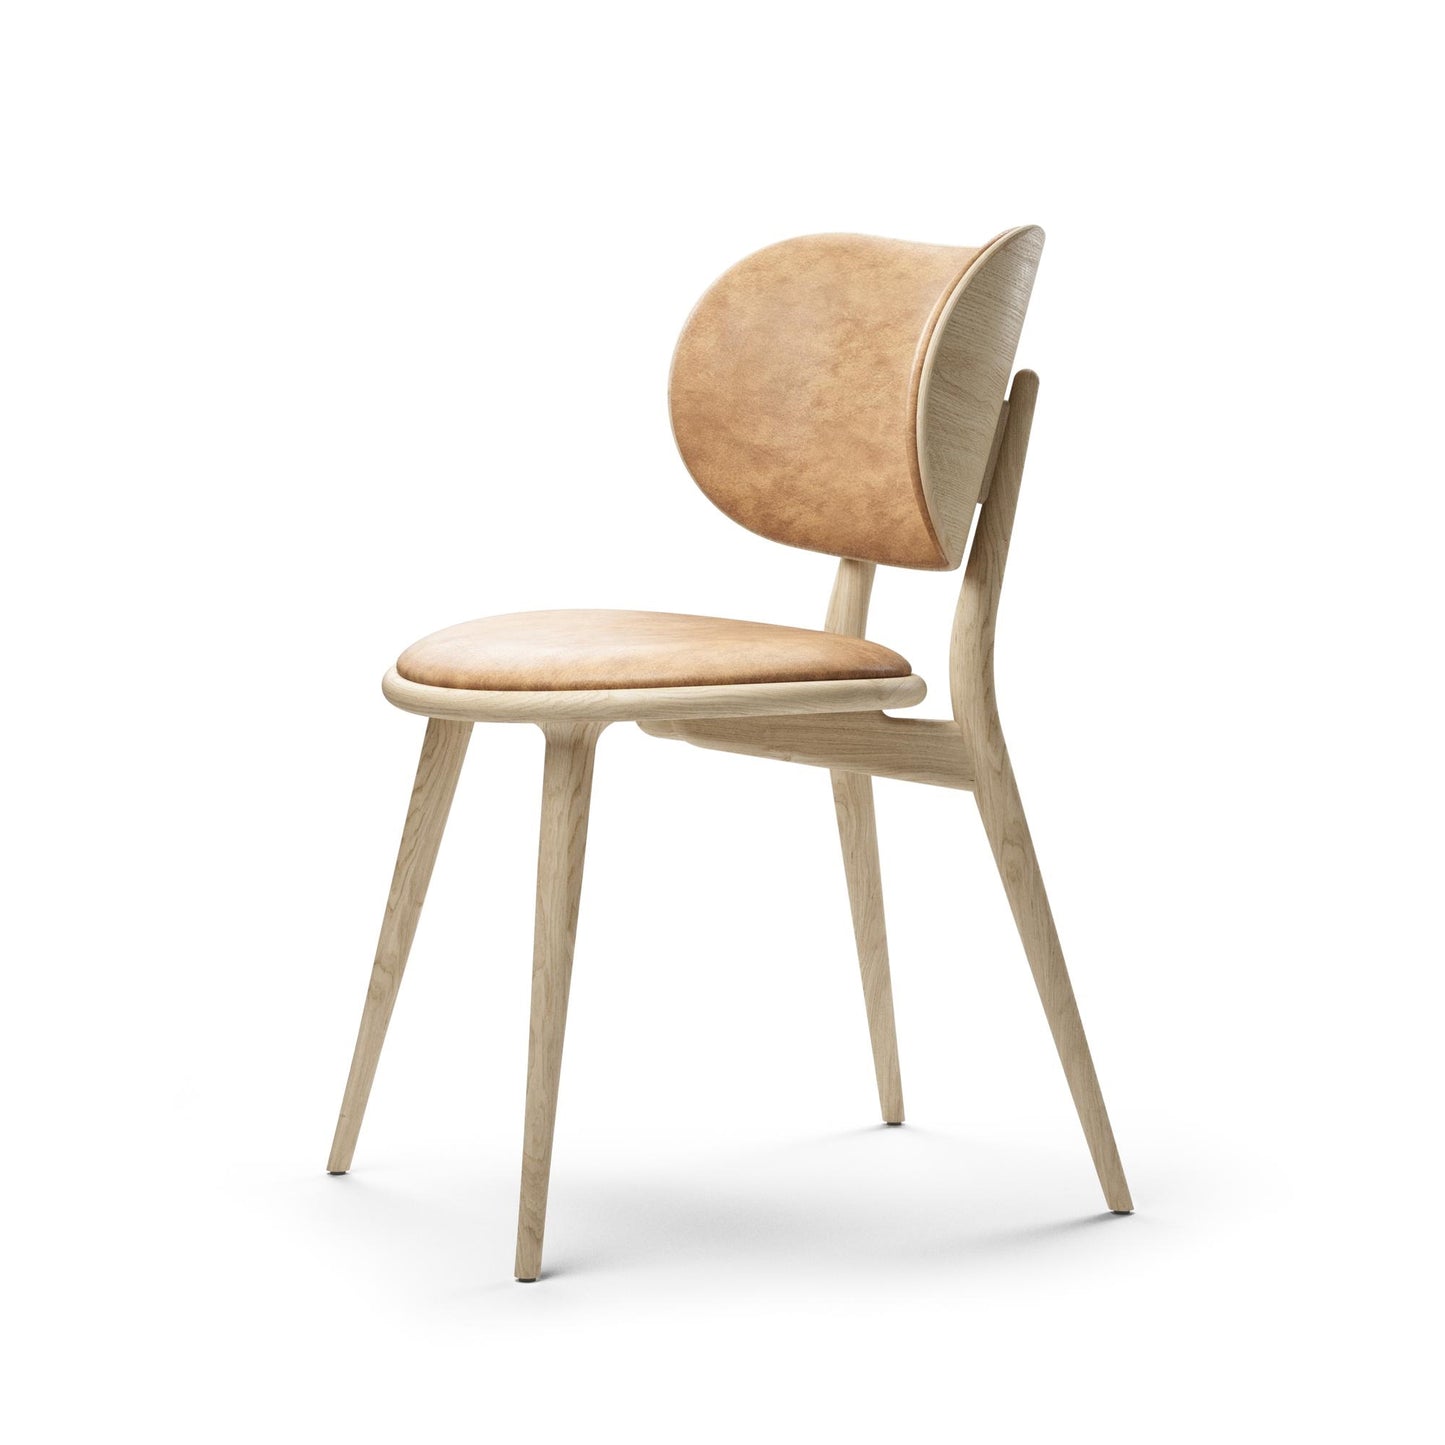 The Dining Chair Dining Chair by Mater #Matt Lacquered Oak